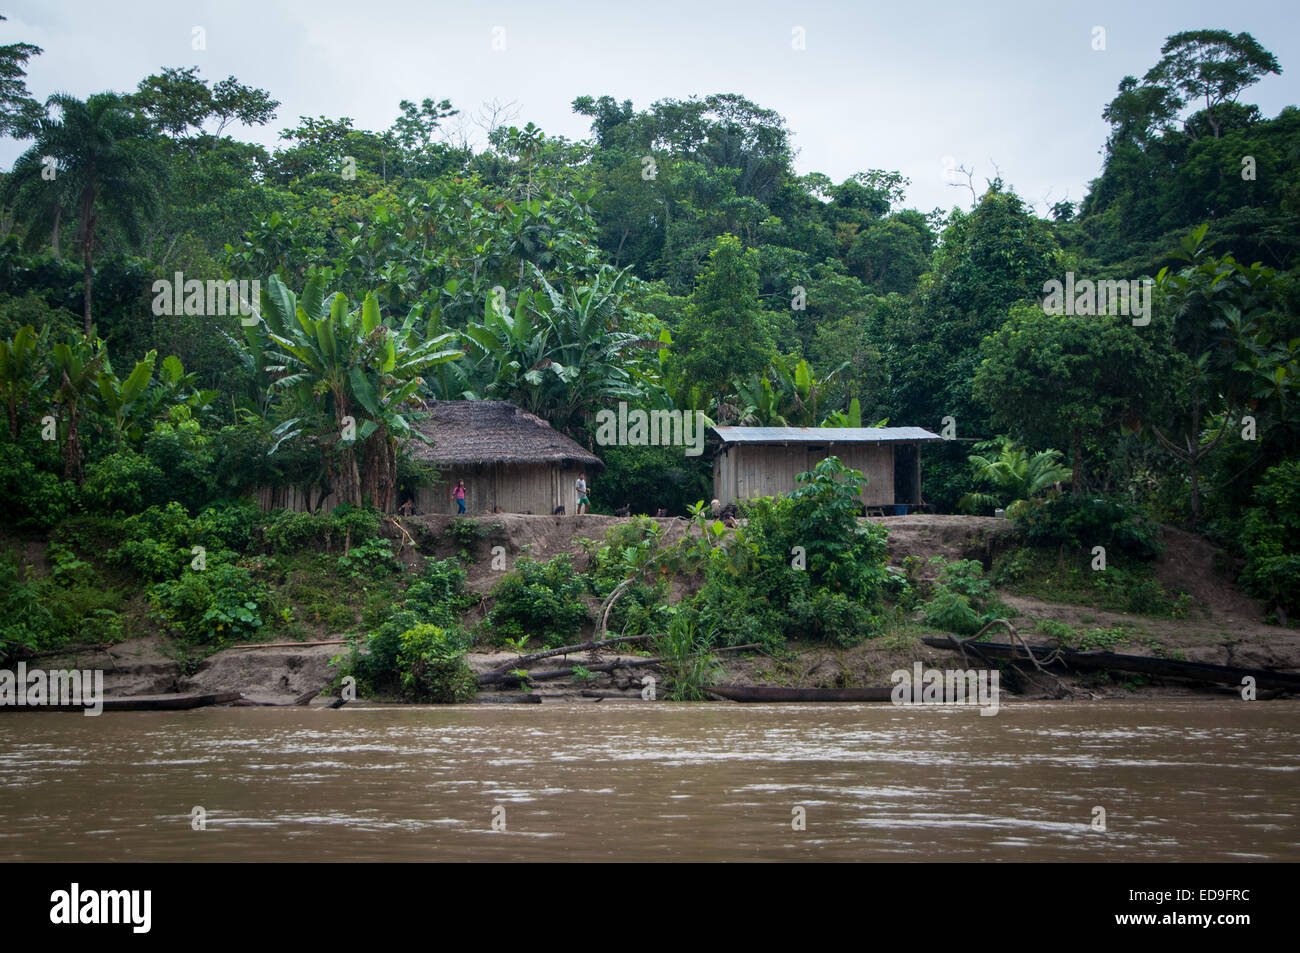 Typical Houses along the River Maranon in the Amazon Jungle Region of Northern Peru Stock Photo